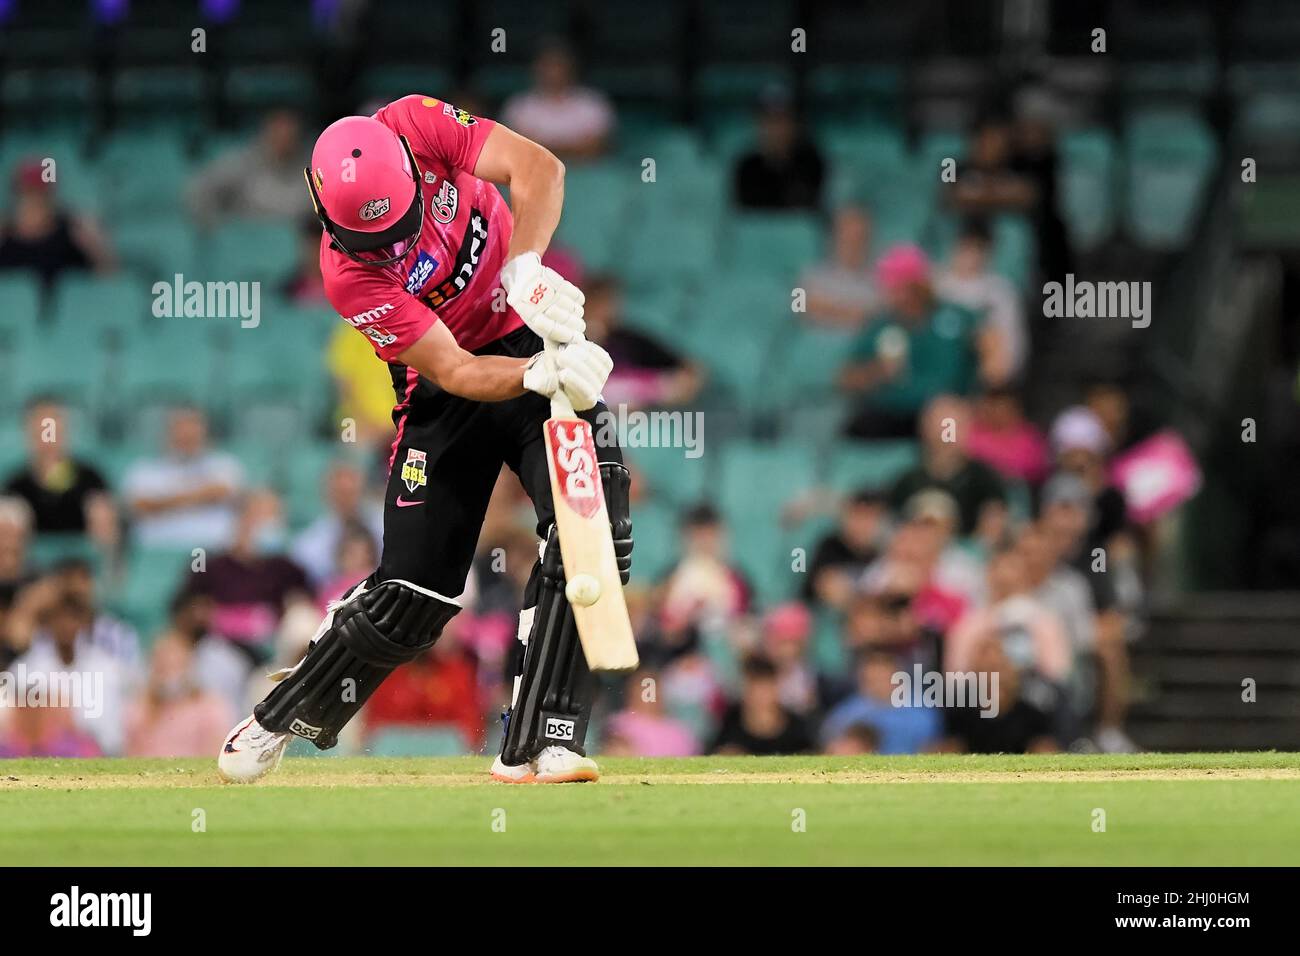 Sydney, Australia, 26 January, 2022. Moises Henriques of the Sixers hits the ball during the Big Bash League Challenger cricket match between Sydney Sixers and Adelaide Strikers at The Sydney Cricket Ground on January 26, 2022 in Sydney, Australia. Credit: Steven Markham/Speed Media/Alamy Live News Stock Photo